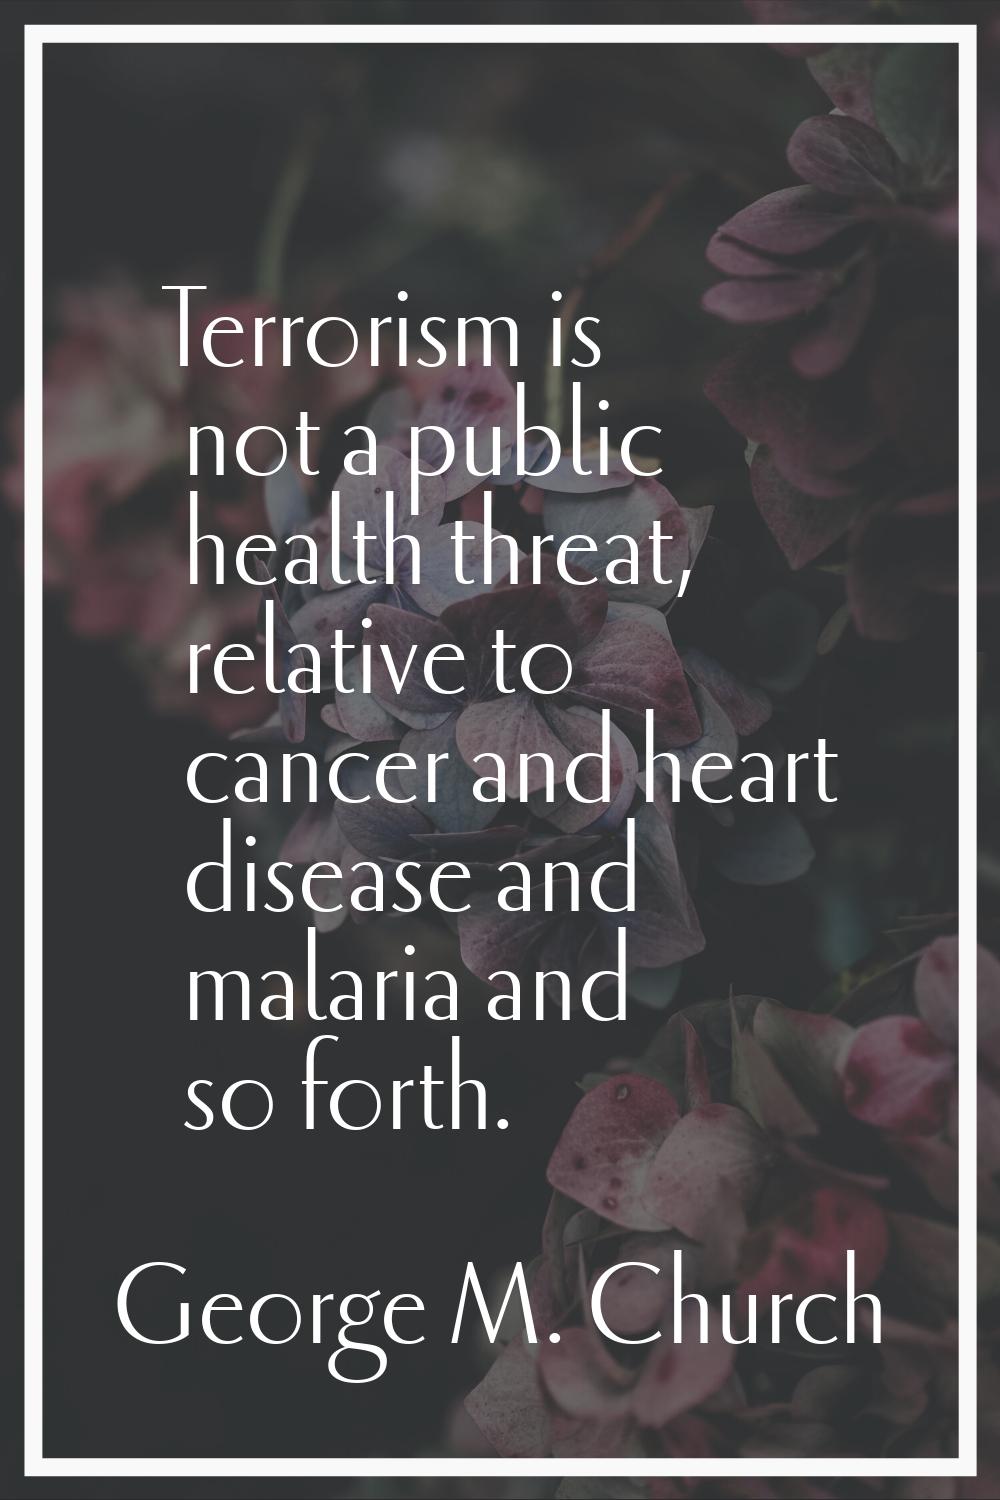 Terrorism is not a public health threat, relative to cancer and heart disease and malaria and so fo